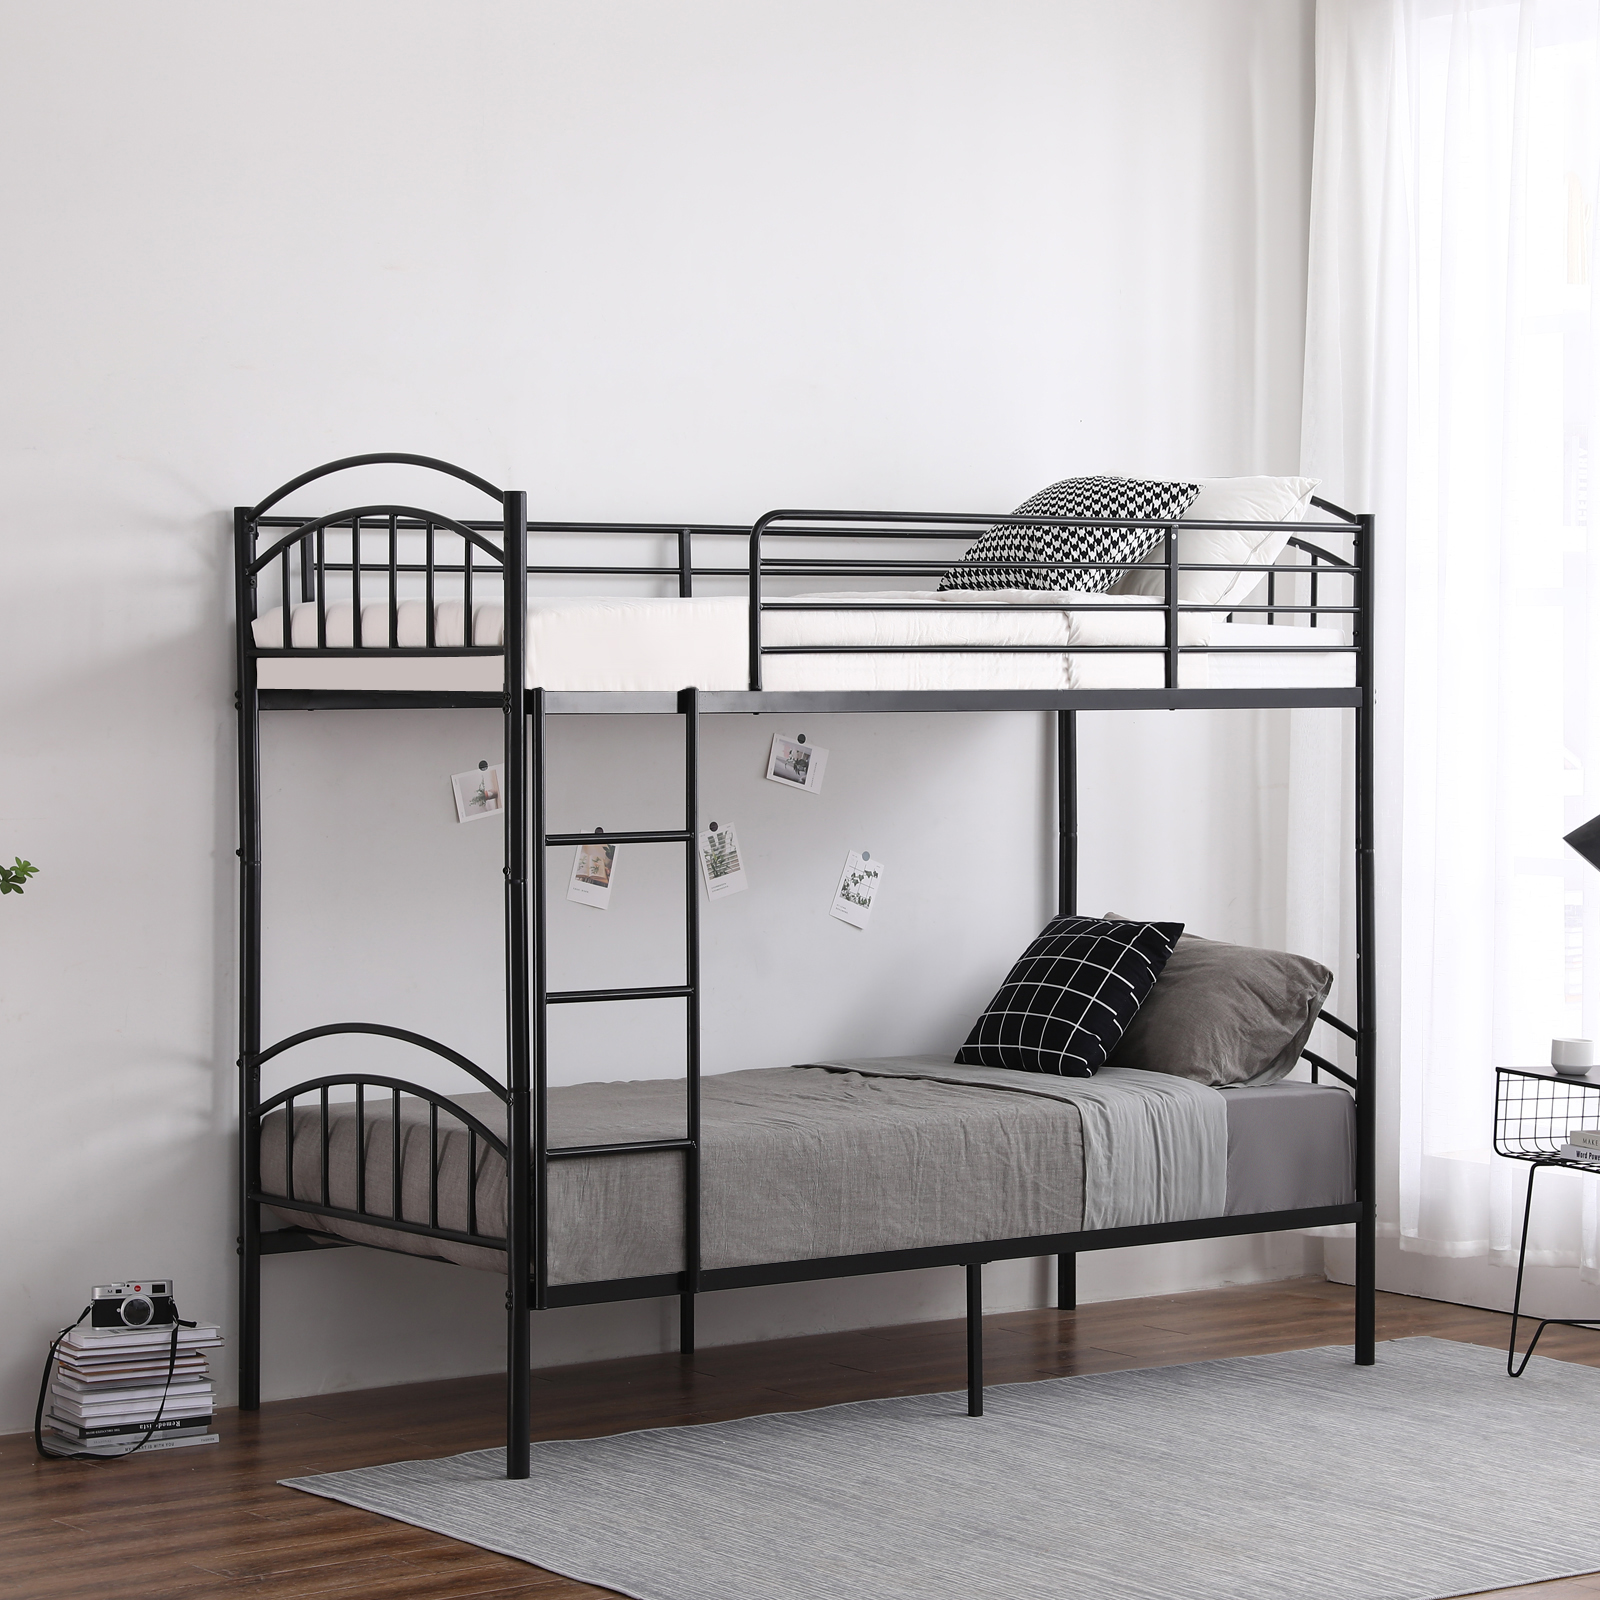 Double Round Column Head and Tail Curved Vertical Pipe Decorative Horizontal Pipe Side Guardrail 3FT Black Iron Bed